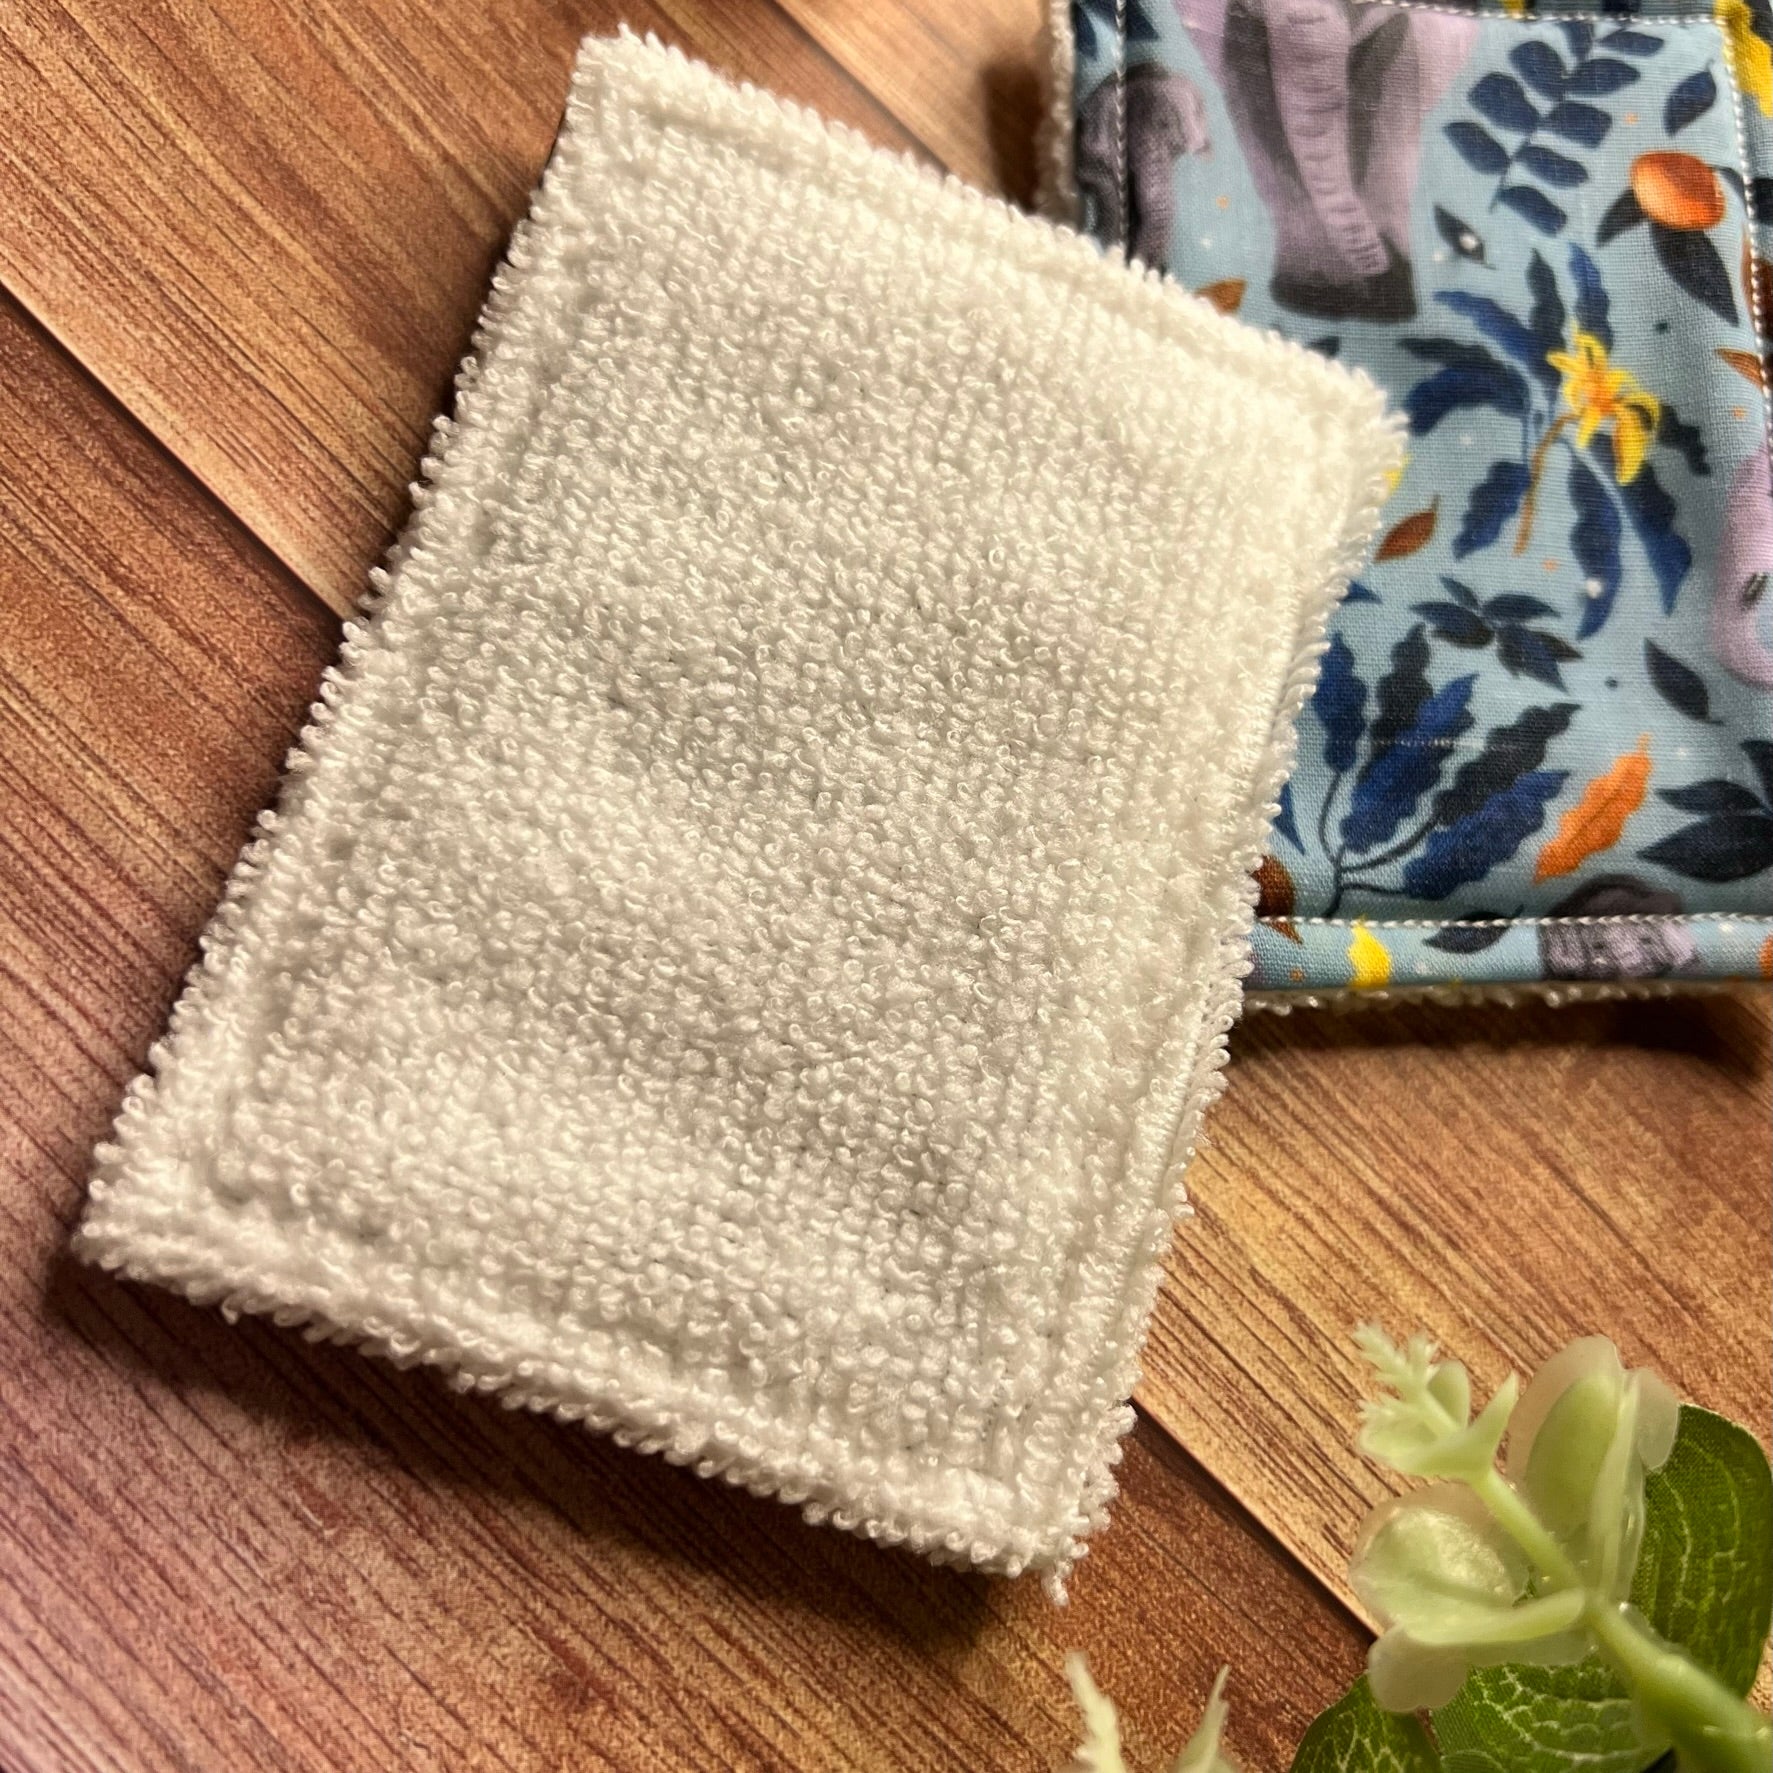 perfect as an eco friendly gift for her, these elephant reusable exfoliating face pads have a soft towelling side to exfoliate your face at home. Ideal as an elephant gift.